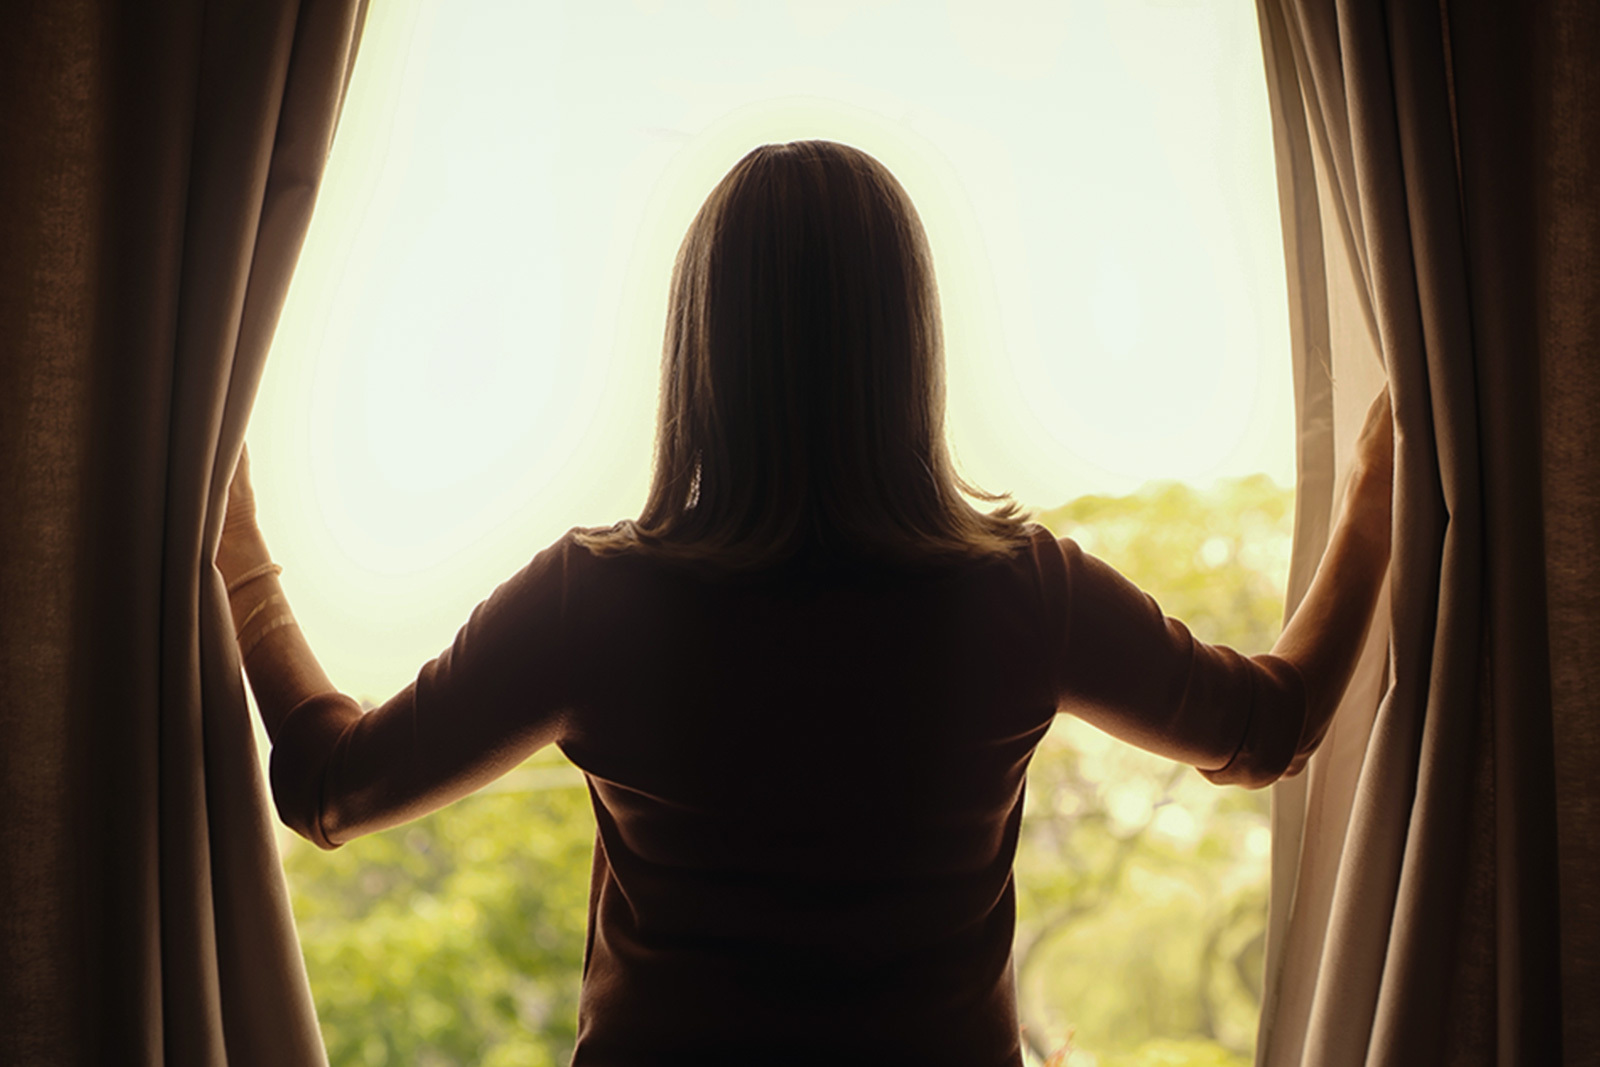 a woman in silhouette draws back the curtains and looks...